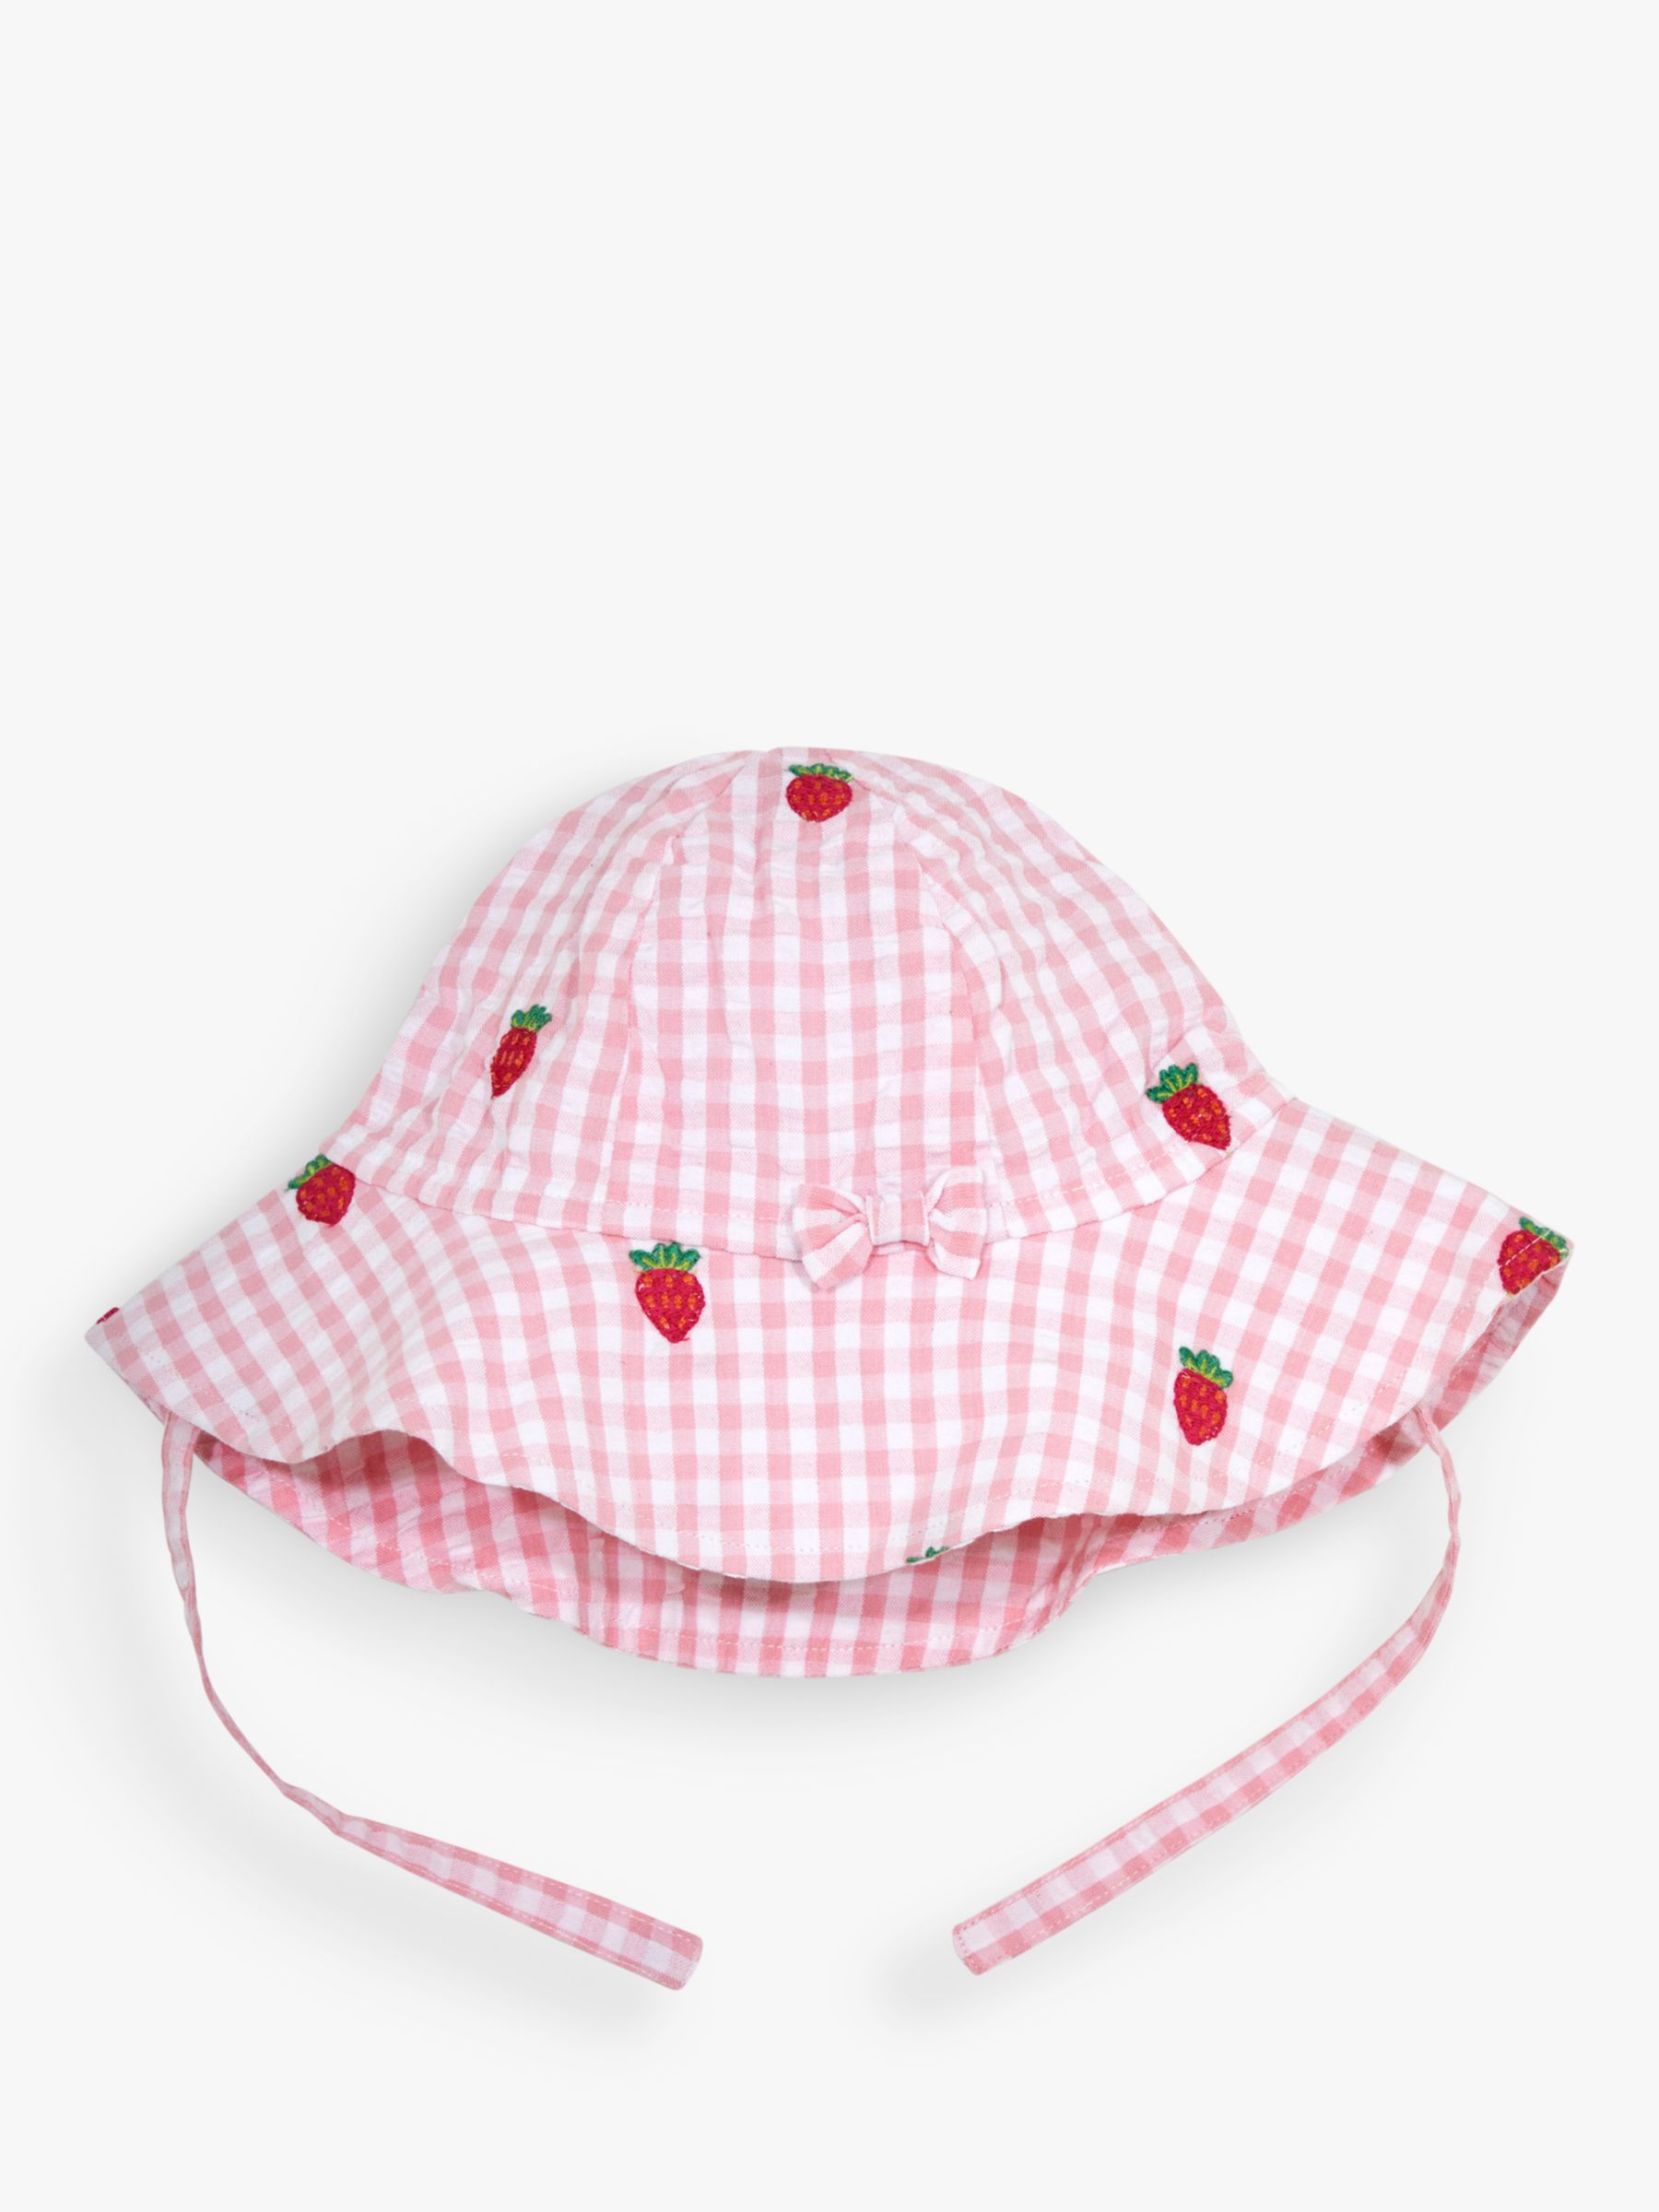 JoJo Maman Bébé Baby Bubble Strawberry Embroidered Gingham Romper & Hat Set, Pink/Multi, 3-6 months